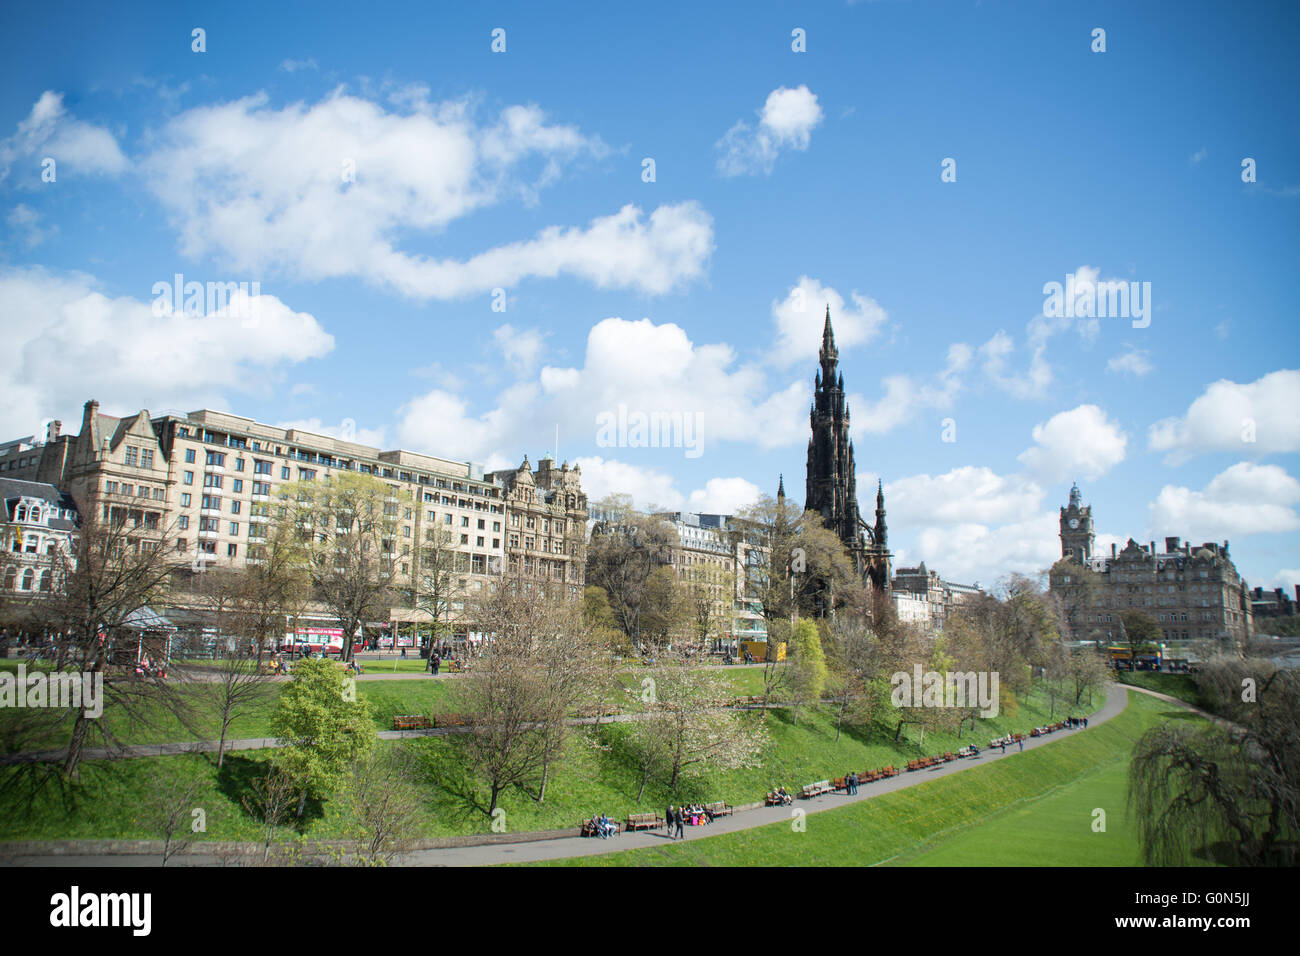 A view on Princes Street architecture in Edinburgh from the gardens on a lovely sunny day Stock Photo